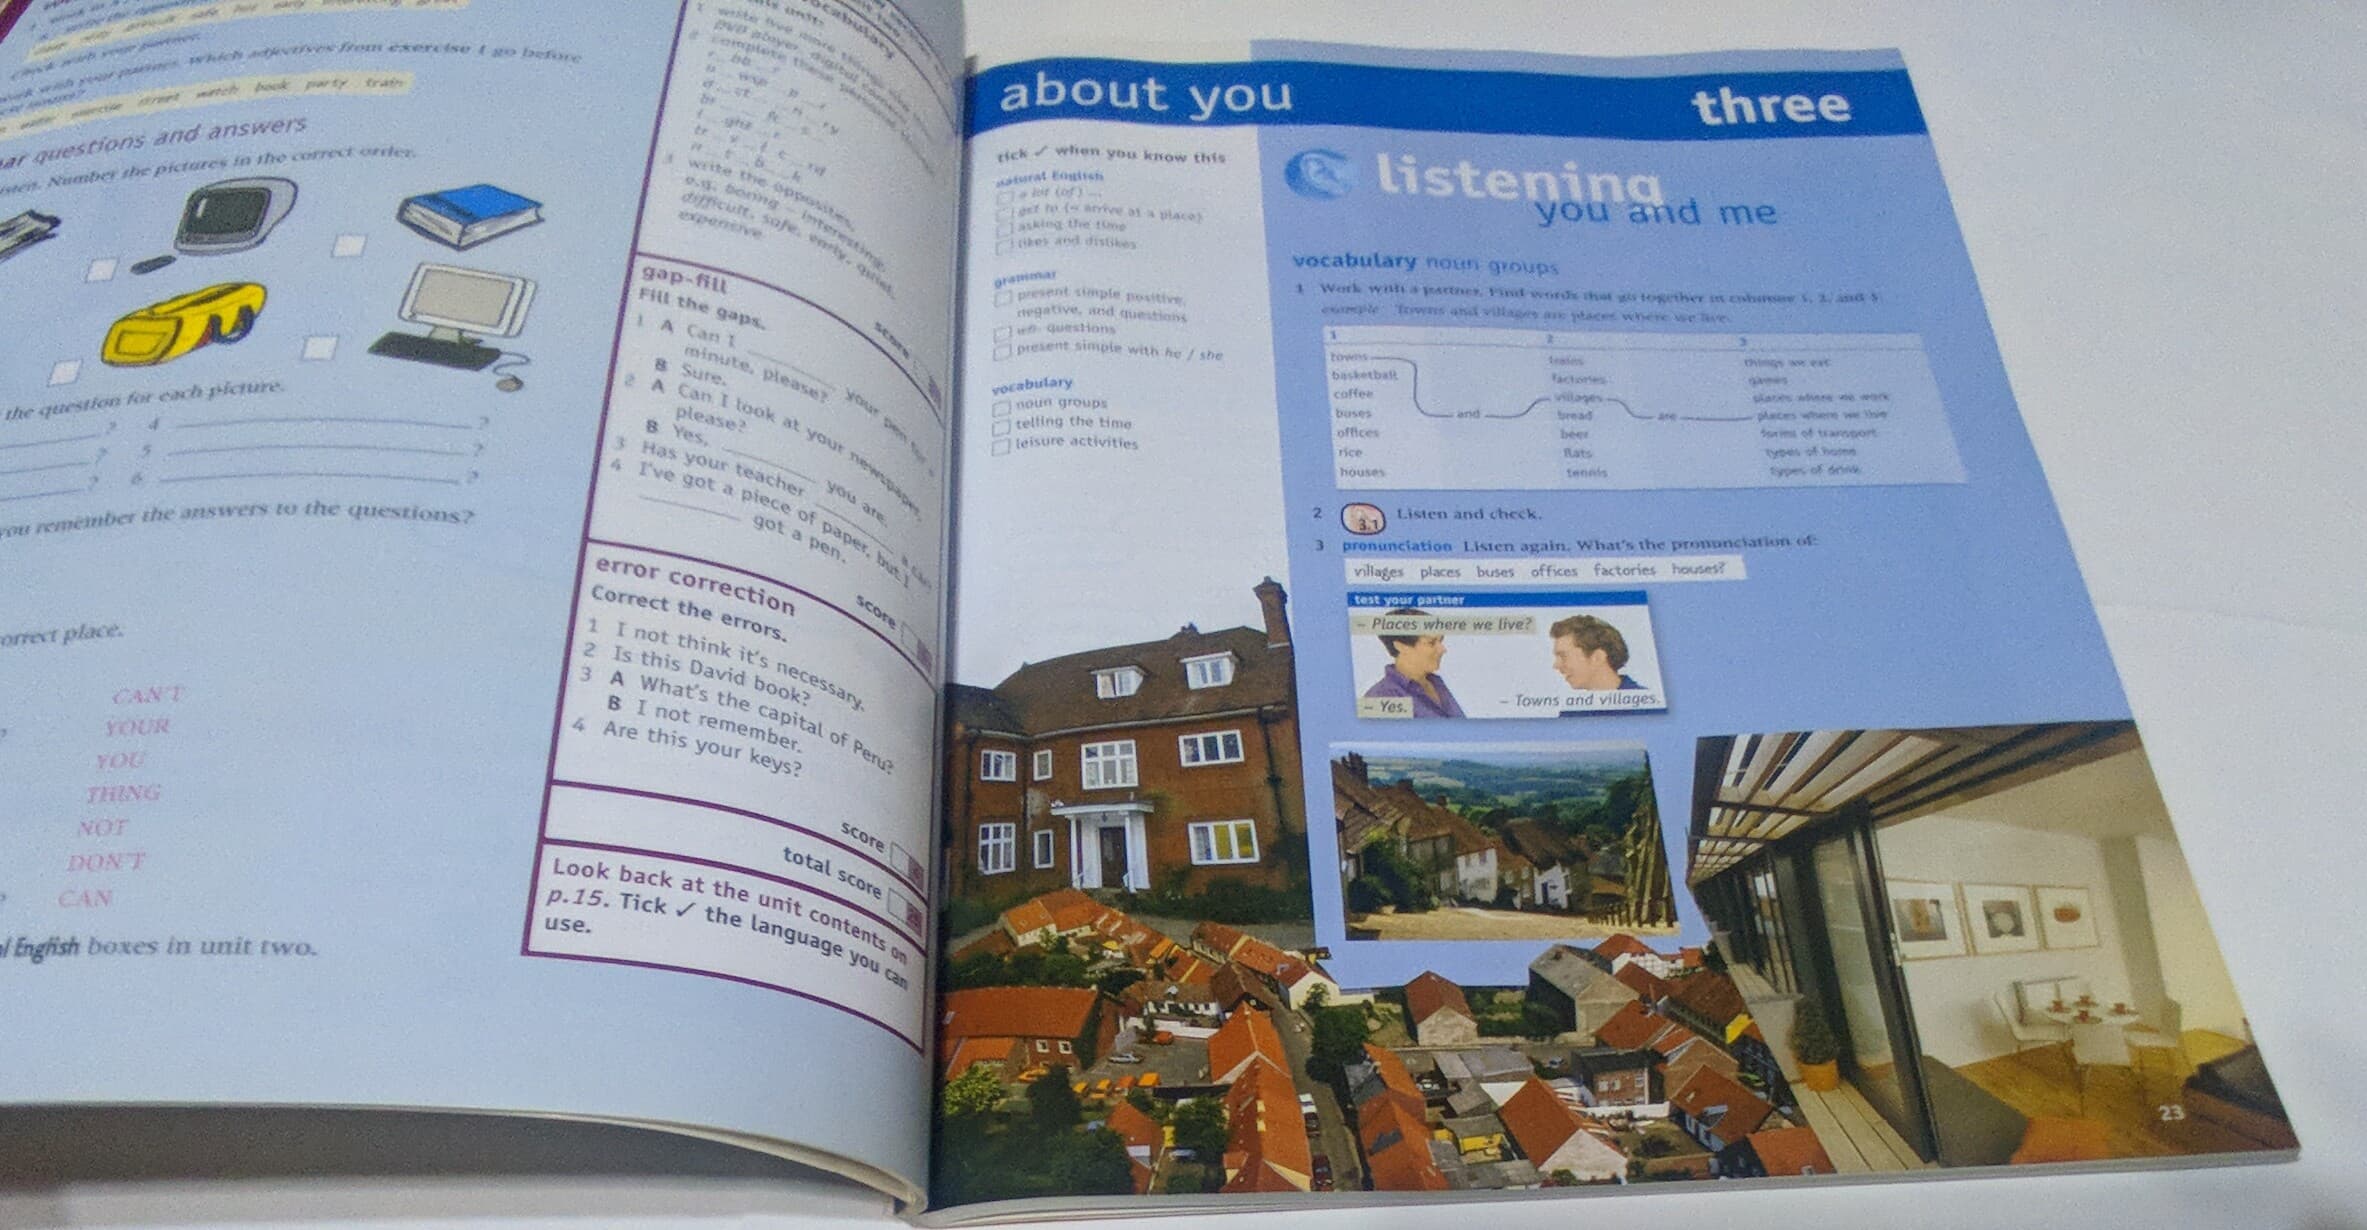 Natural English Elementary Student's Book+Workbook with key+Teacher's Book+Class Audio CDs 세트